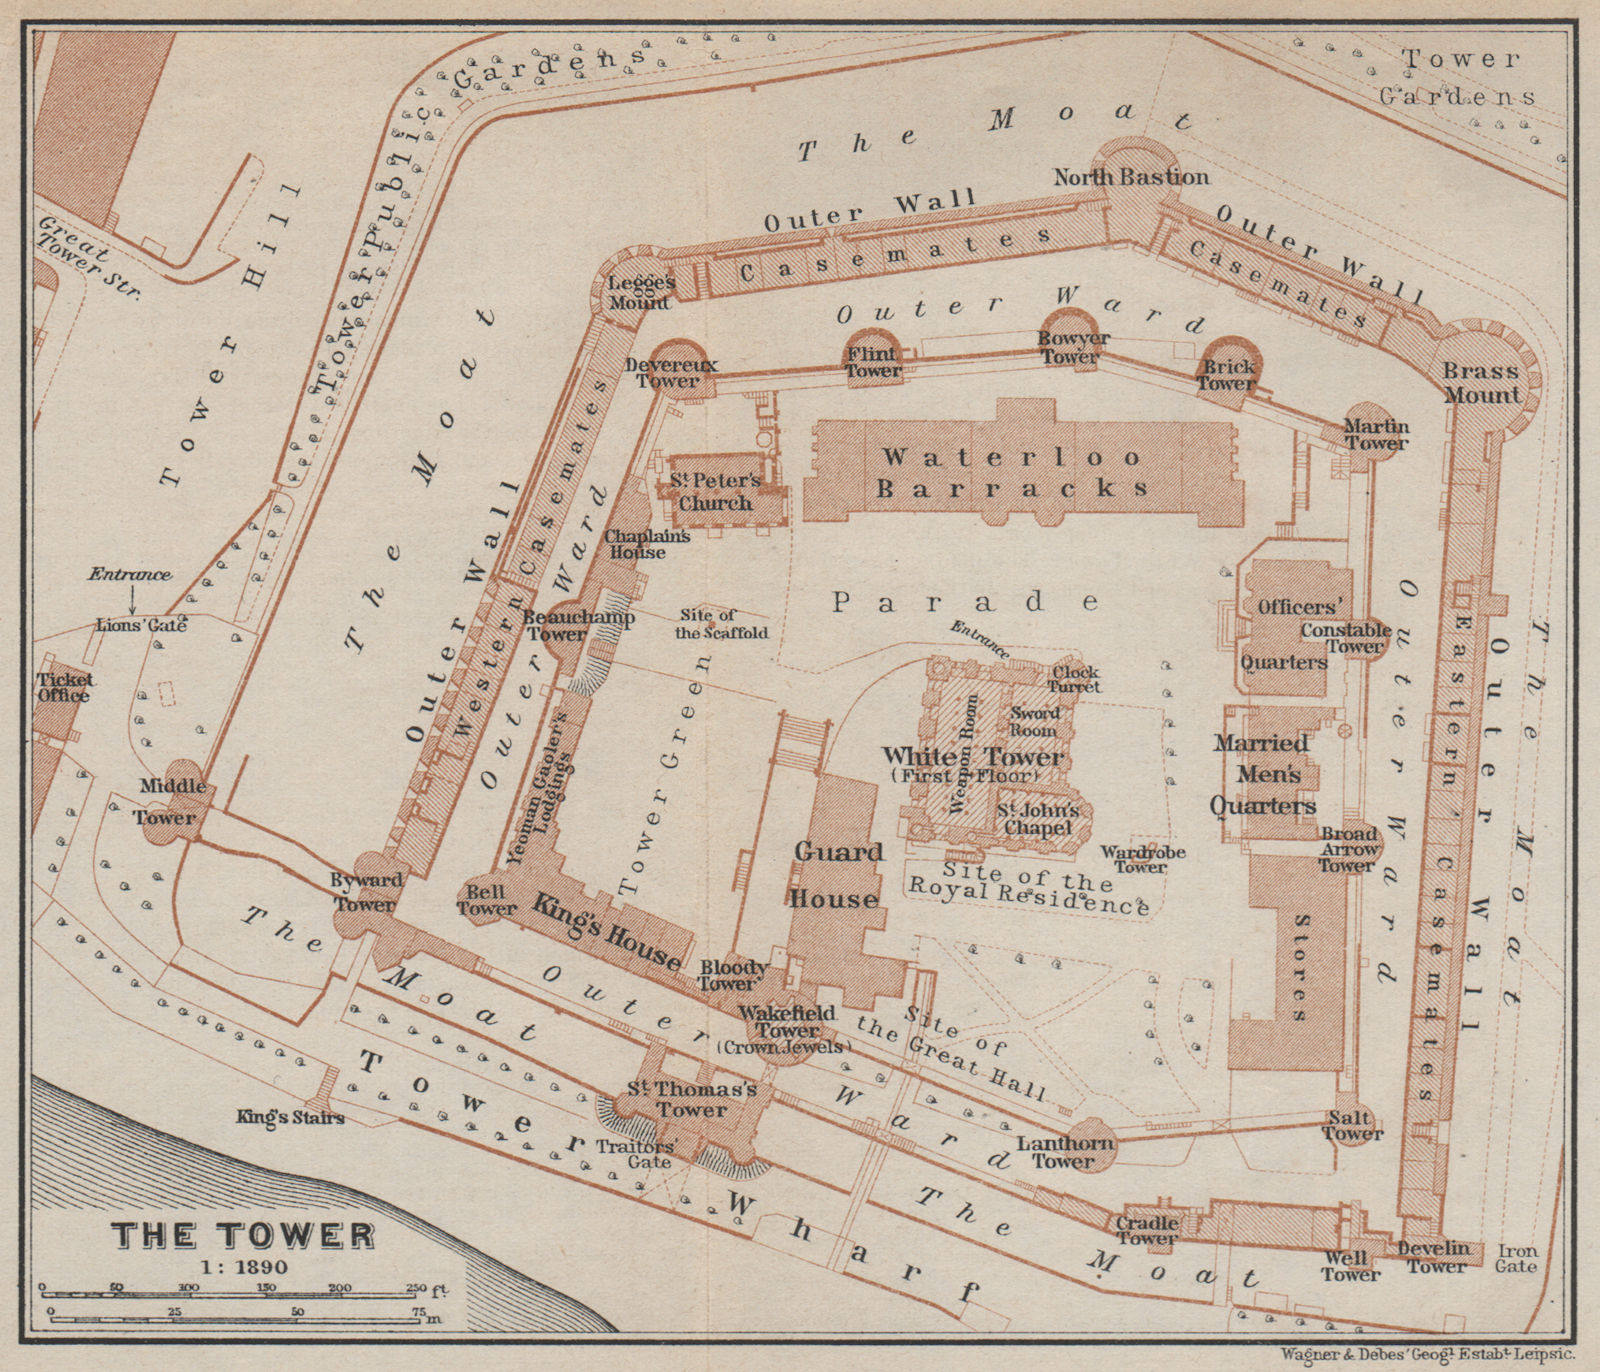 Associate Product THE TOWER OF LONDON ground plan. BAEDEKER 1930 old vintage map chart